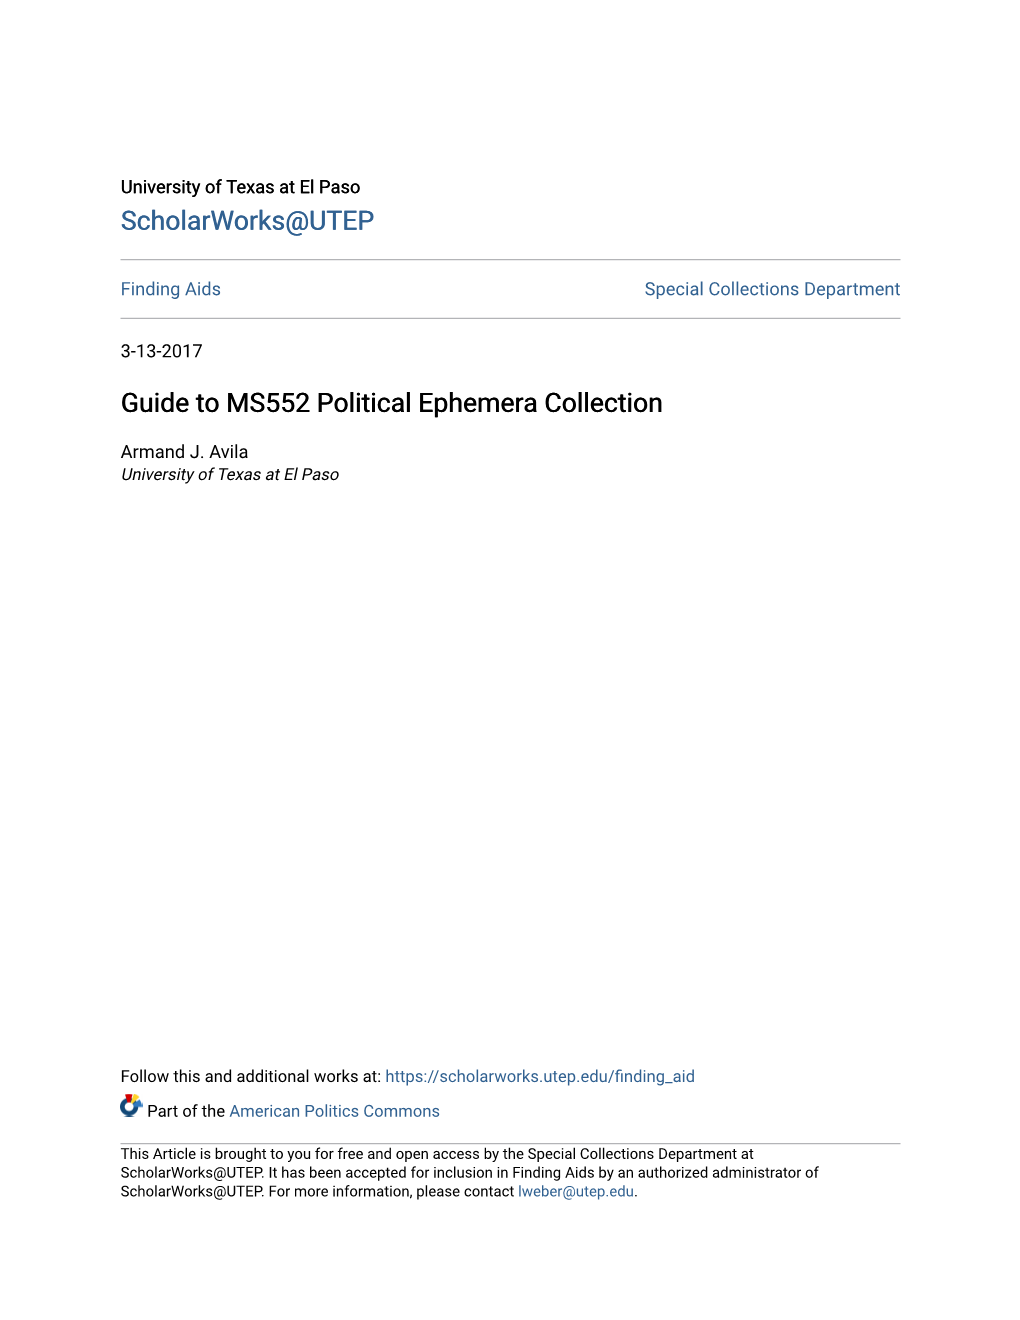 Guide to MS552 Political Ephemera Collection